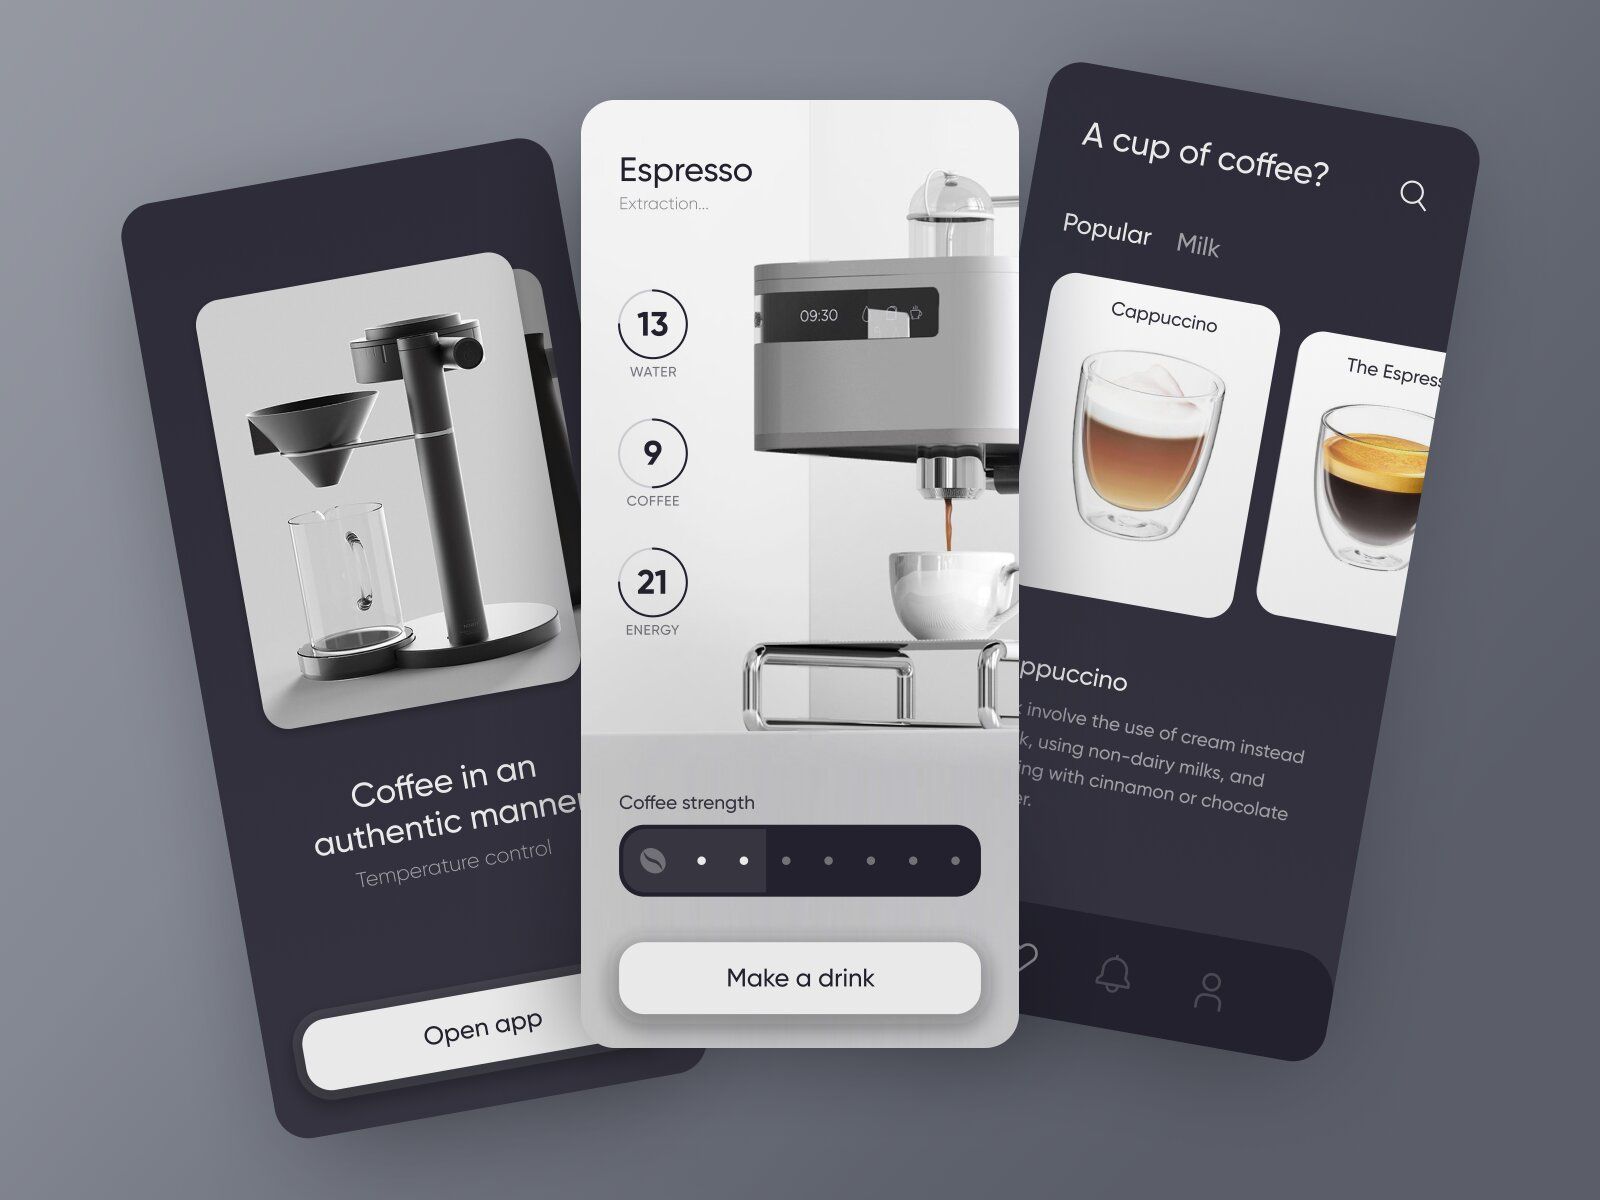 A smart home system for an IoT device can be controlled via a mobile app (*image by [Stas Koval](https://dribbble.com/StasKoval){ rel="nofollow" target="_blank" .default-md}*)